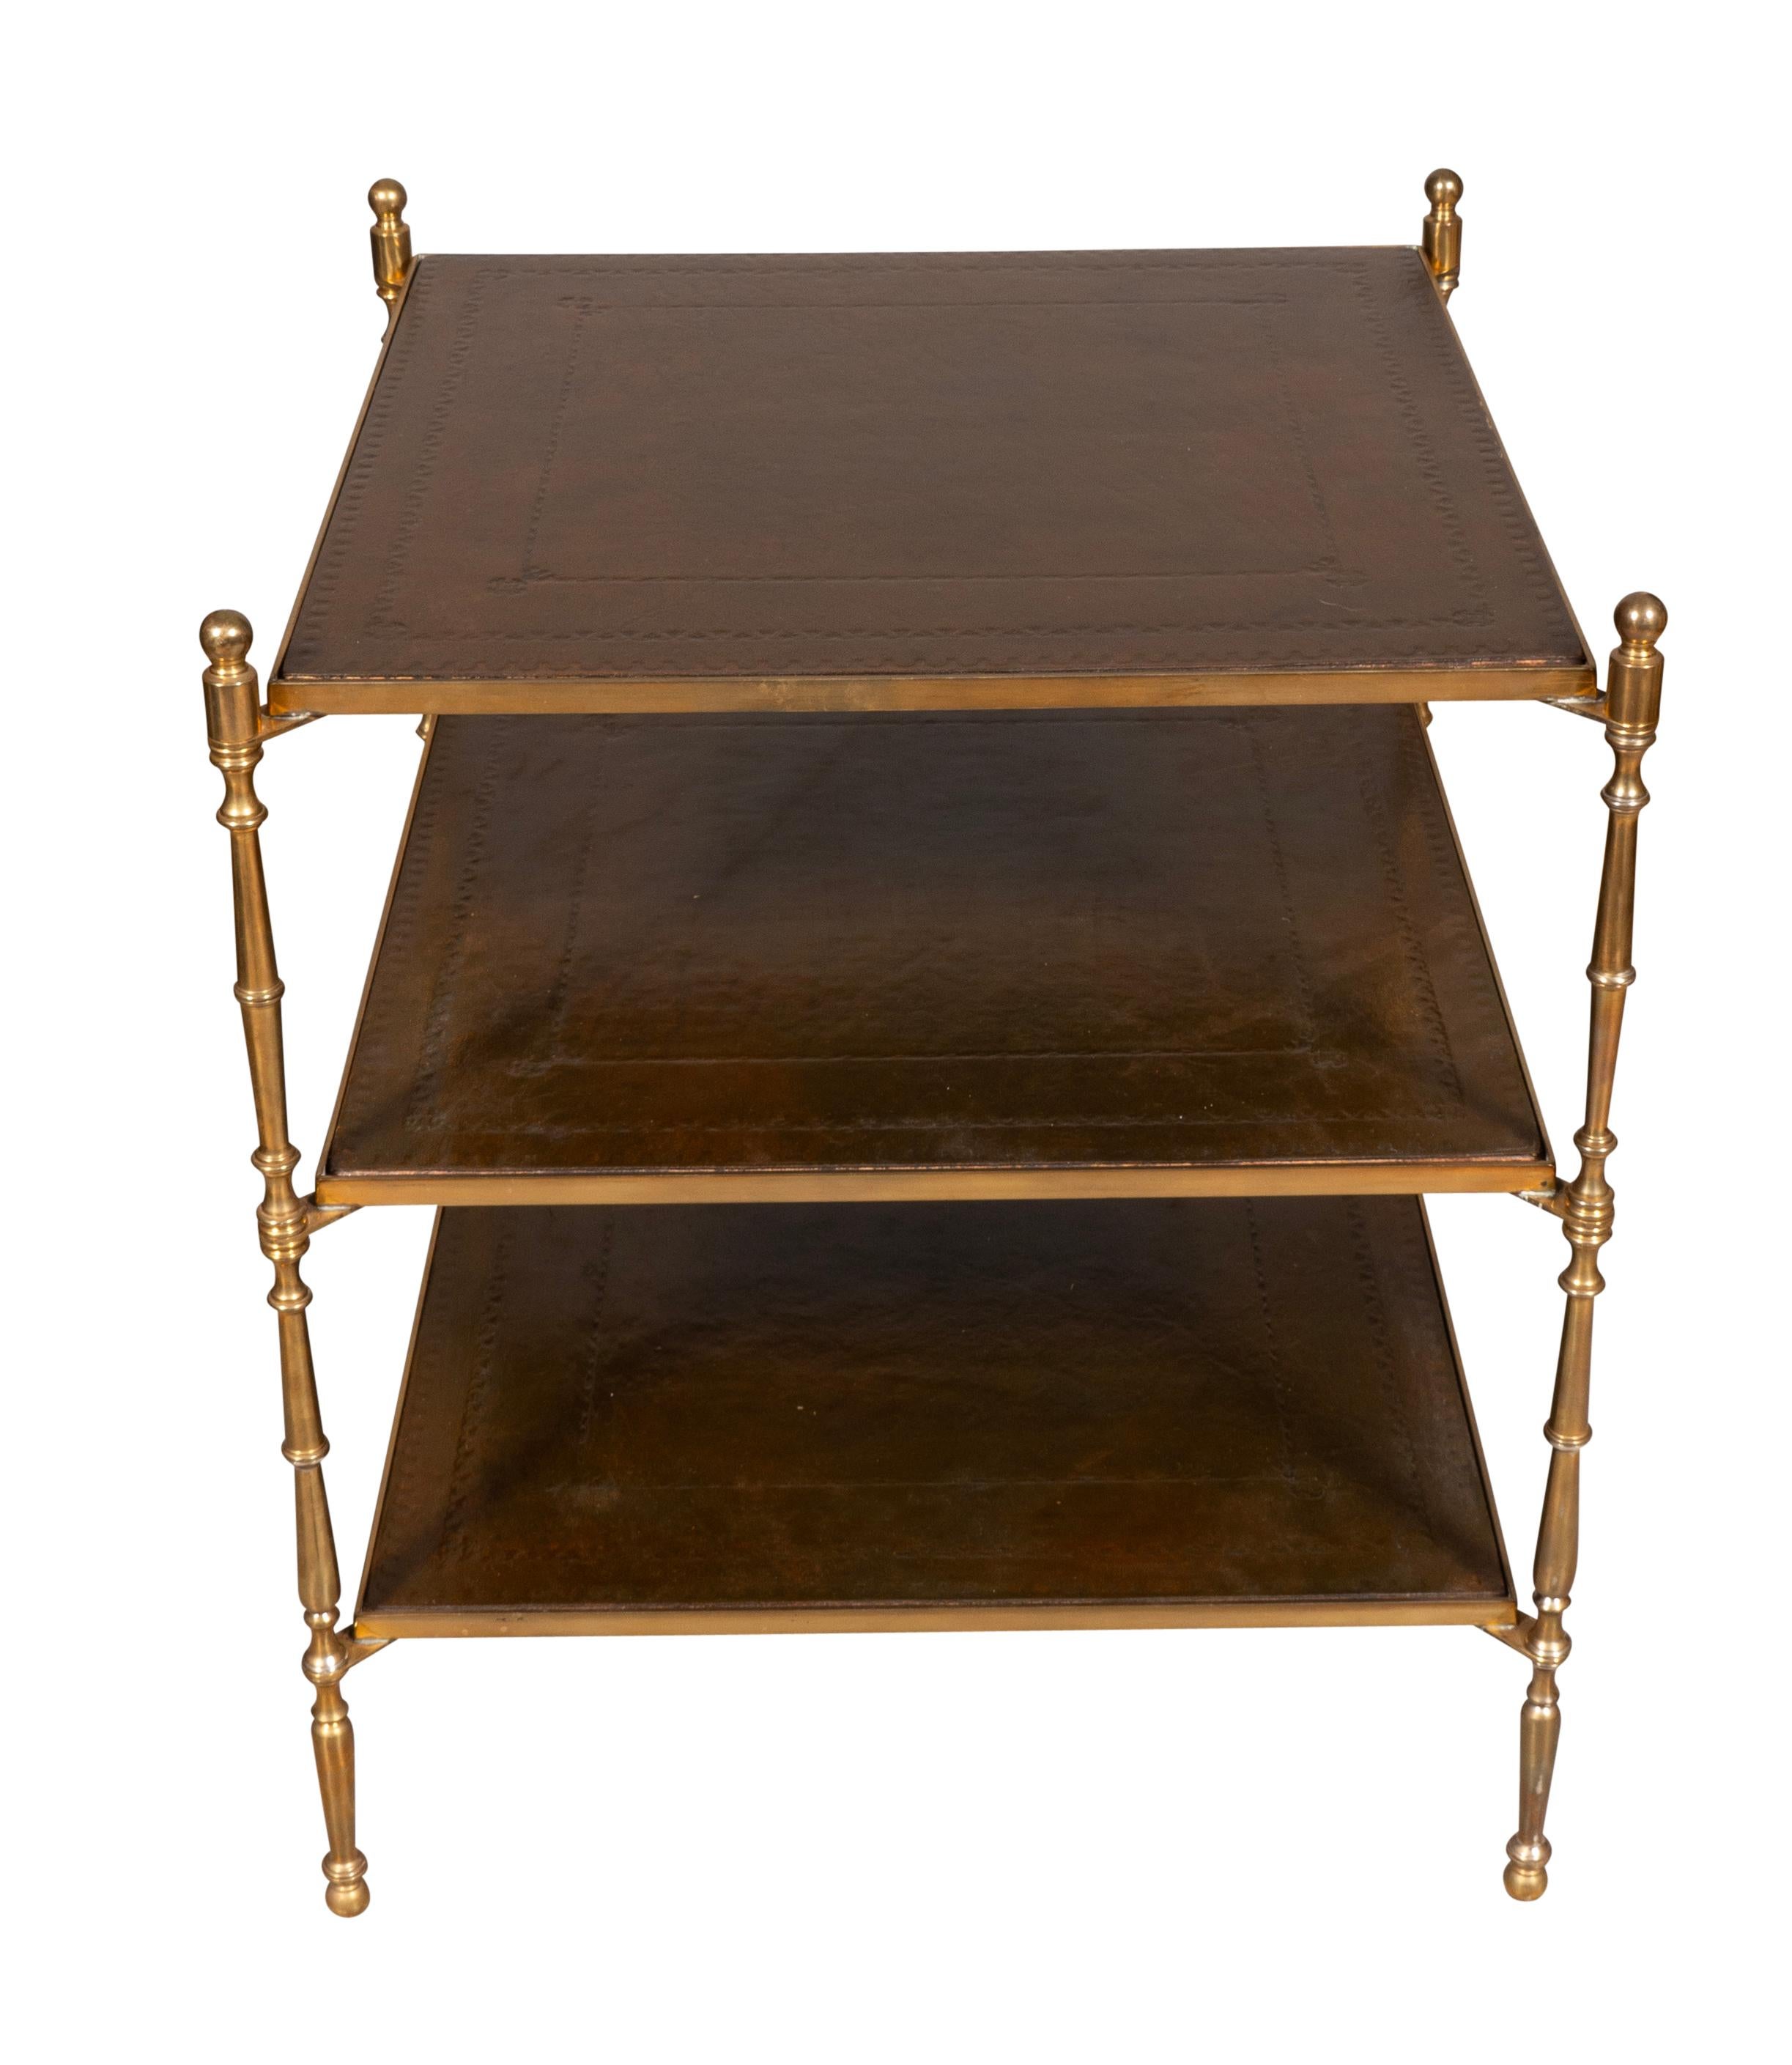 Three  brass framed square brown leather shelves with turned brass supports and legs.